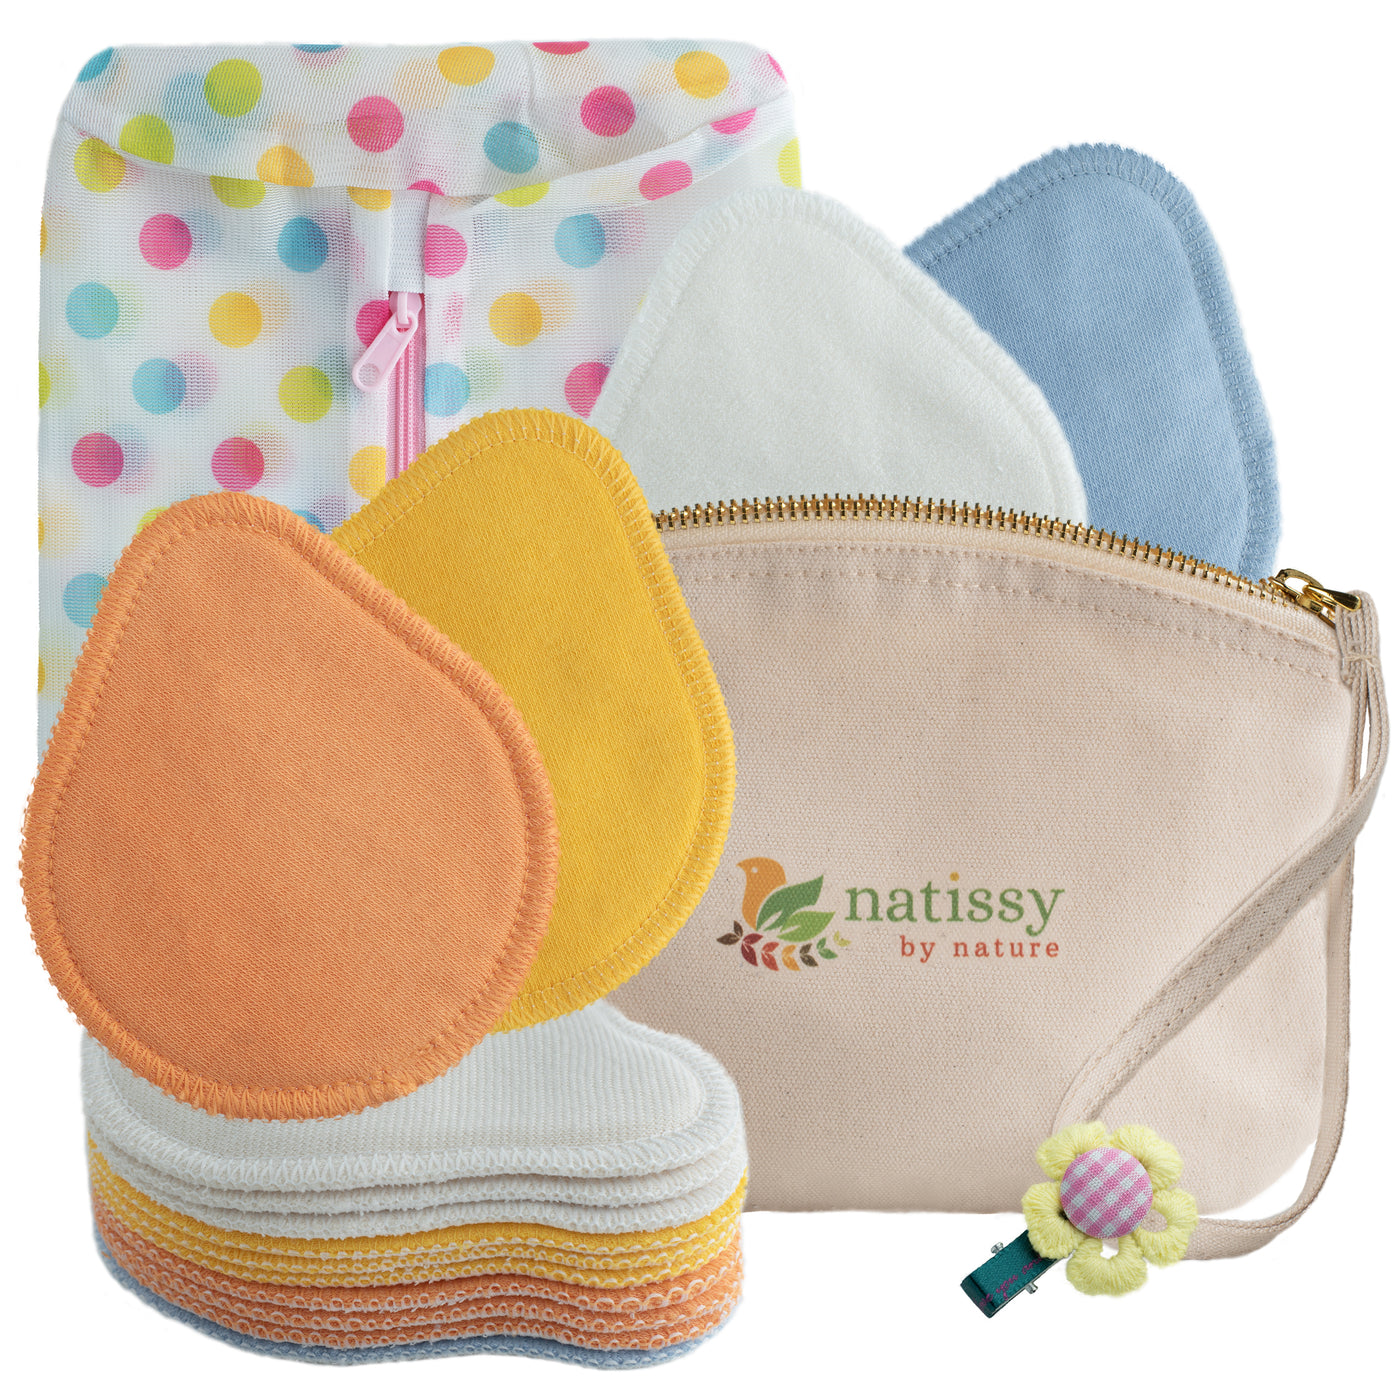 Washable Organic Cotton Soft Nursing Breast Cloth Pads Made in EU